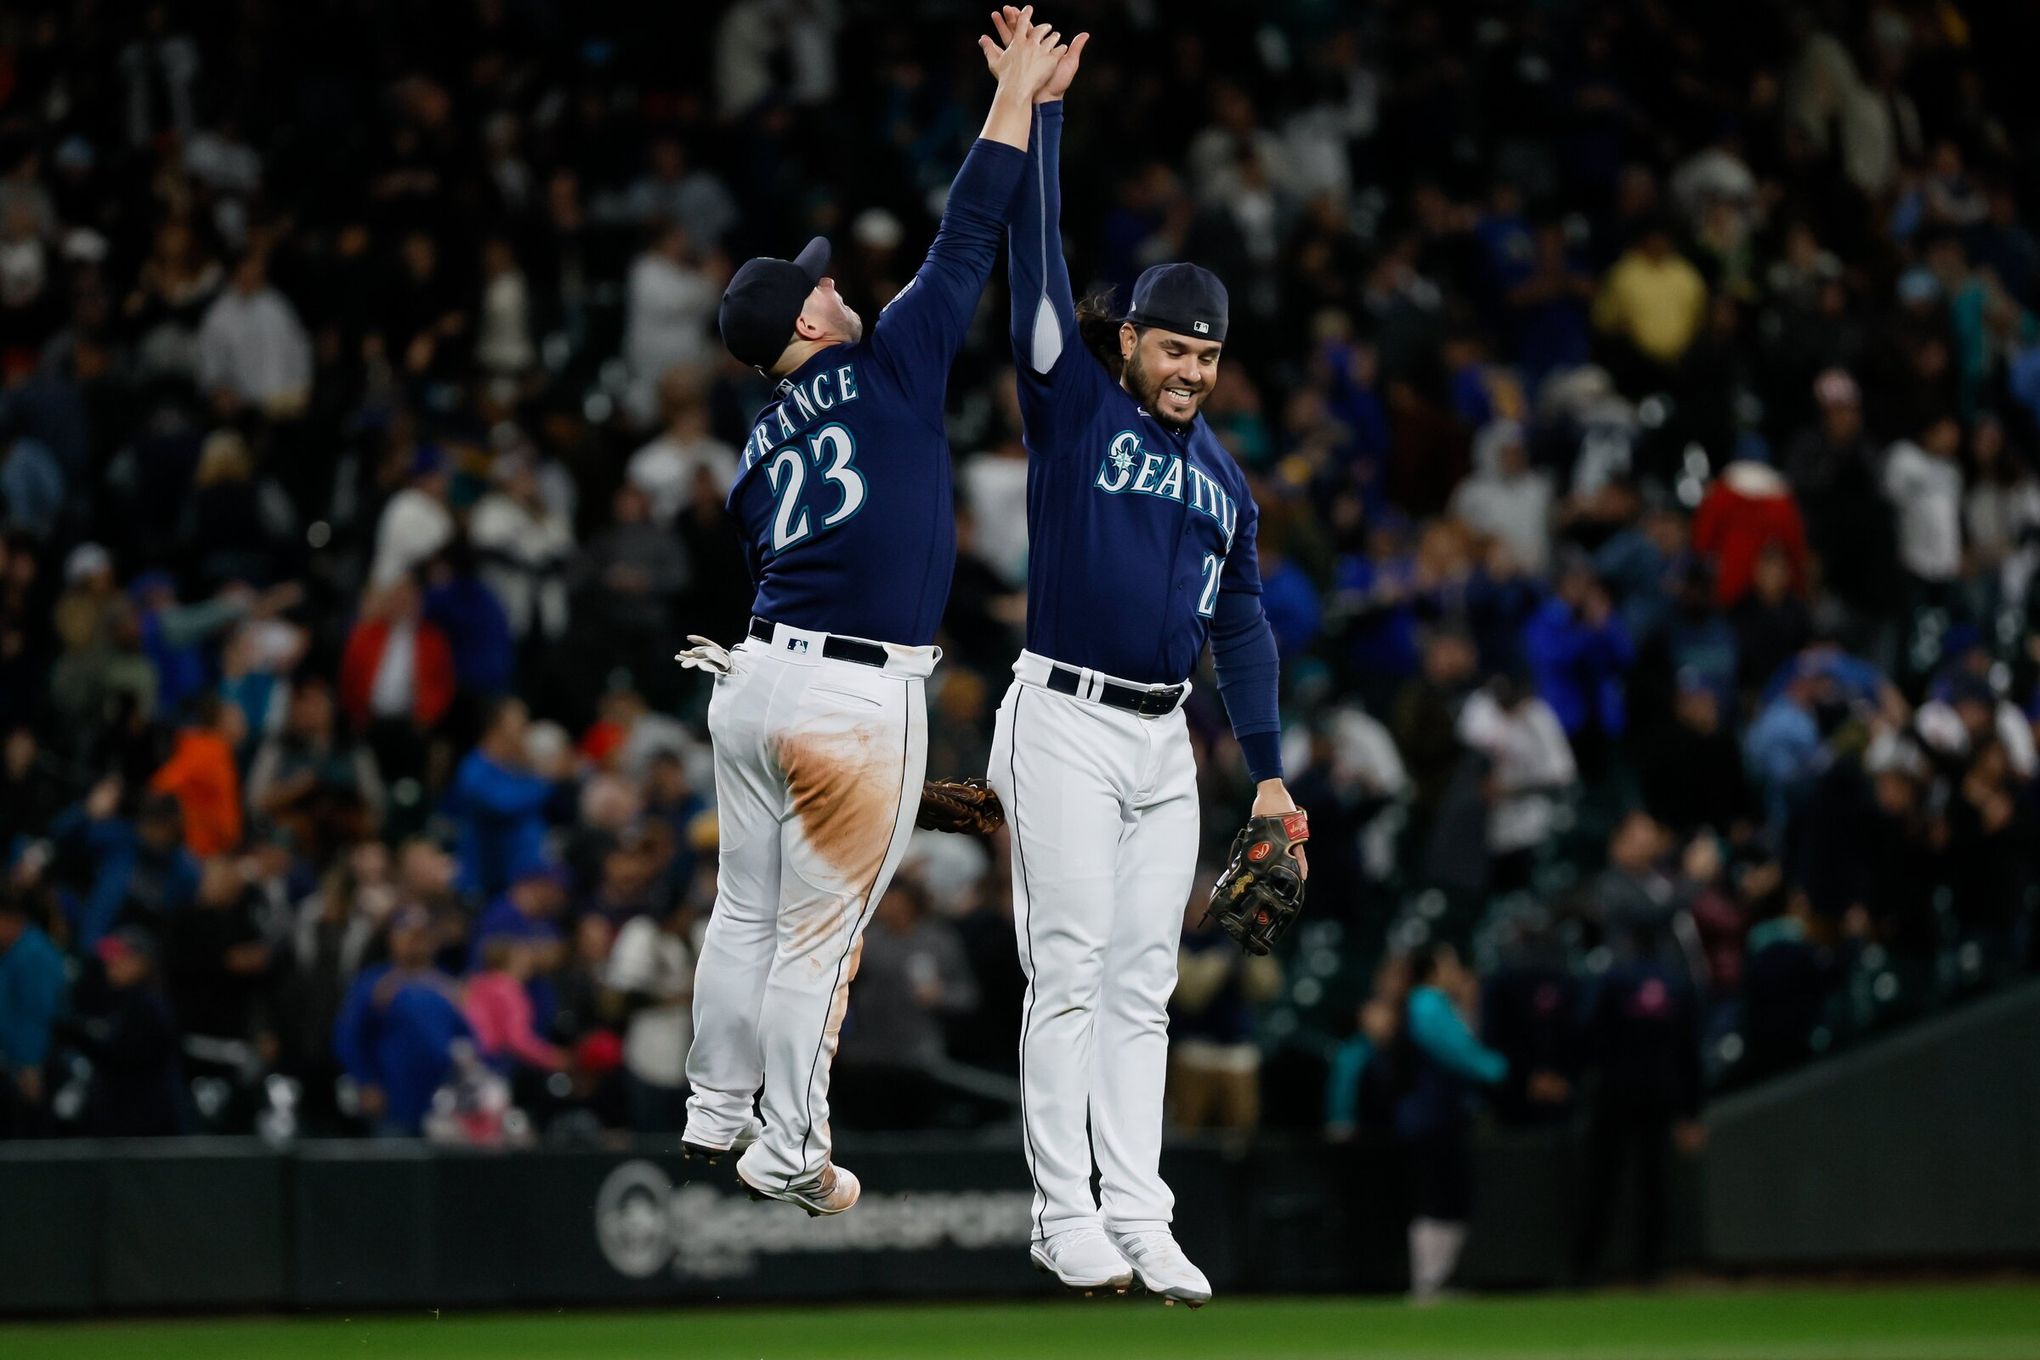 George Kirby pitches a gem, offense comes through as Mariners beat Astros